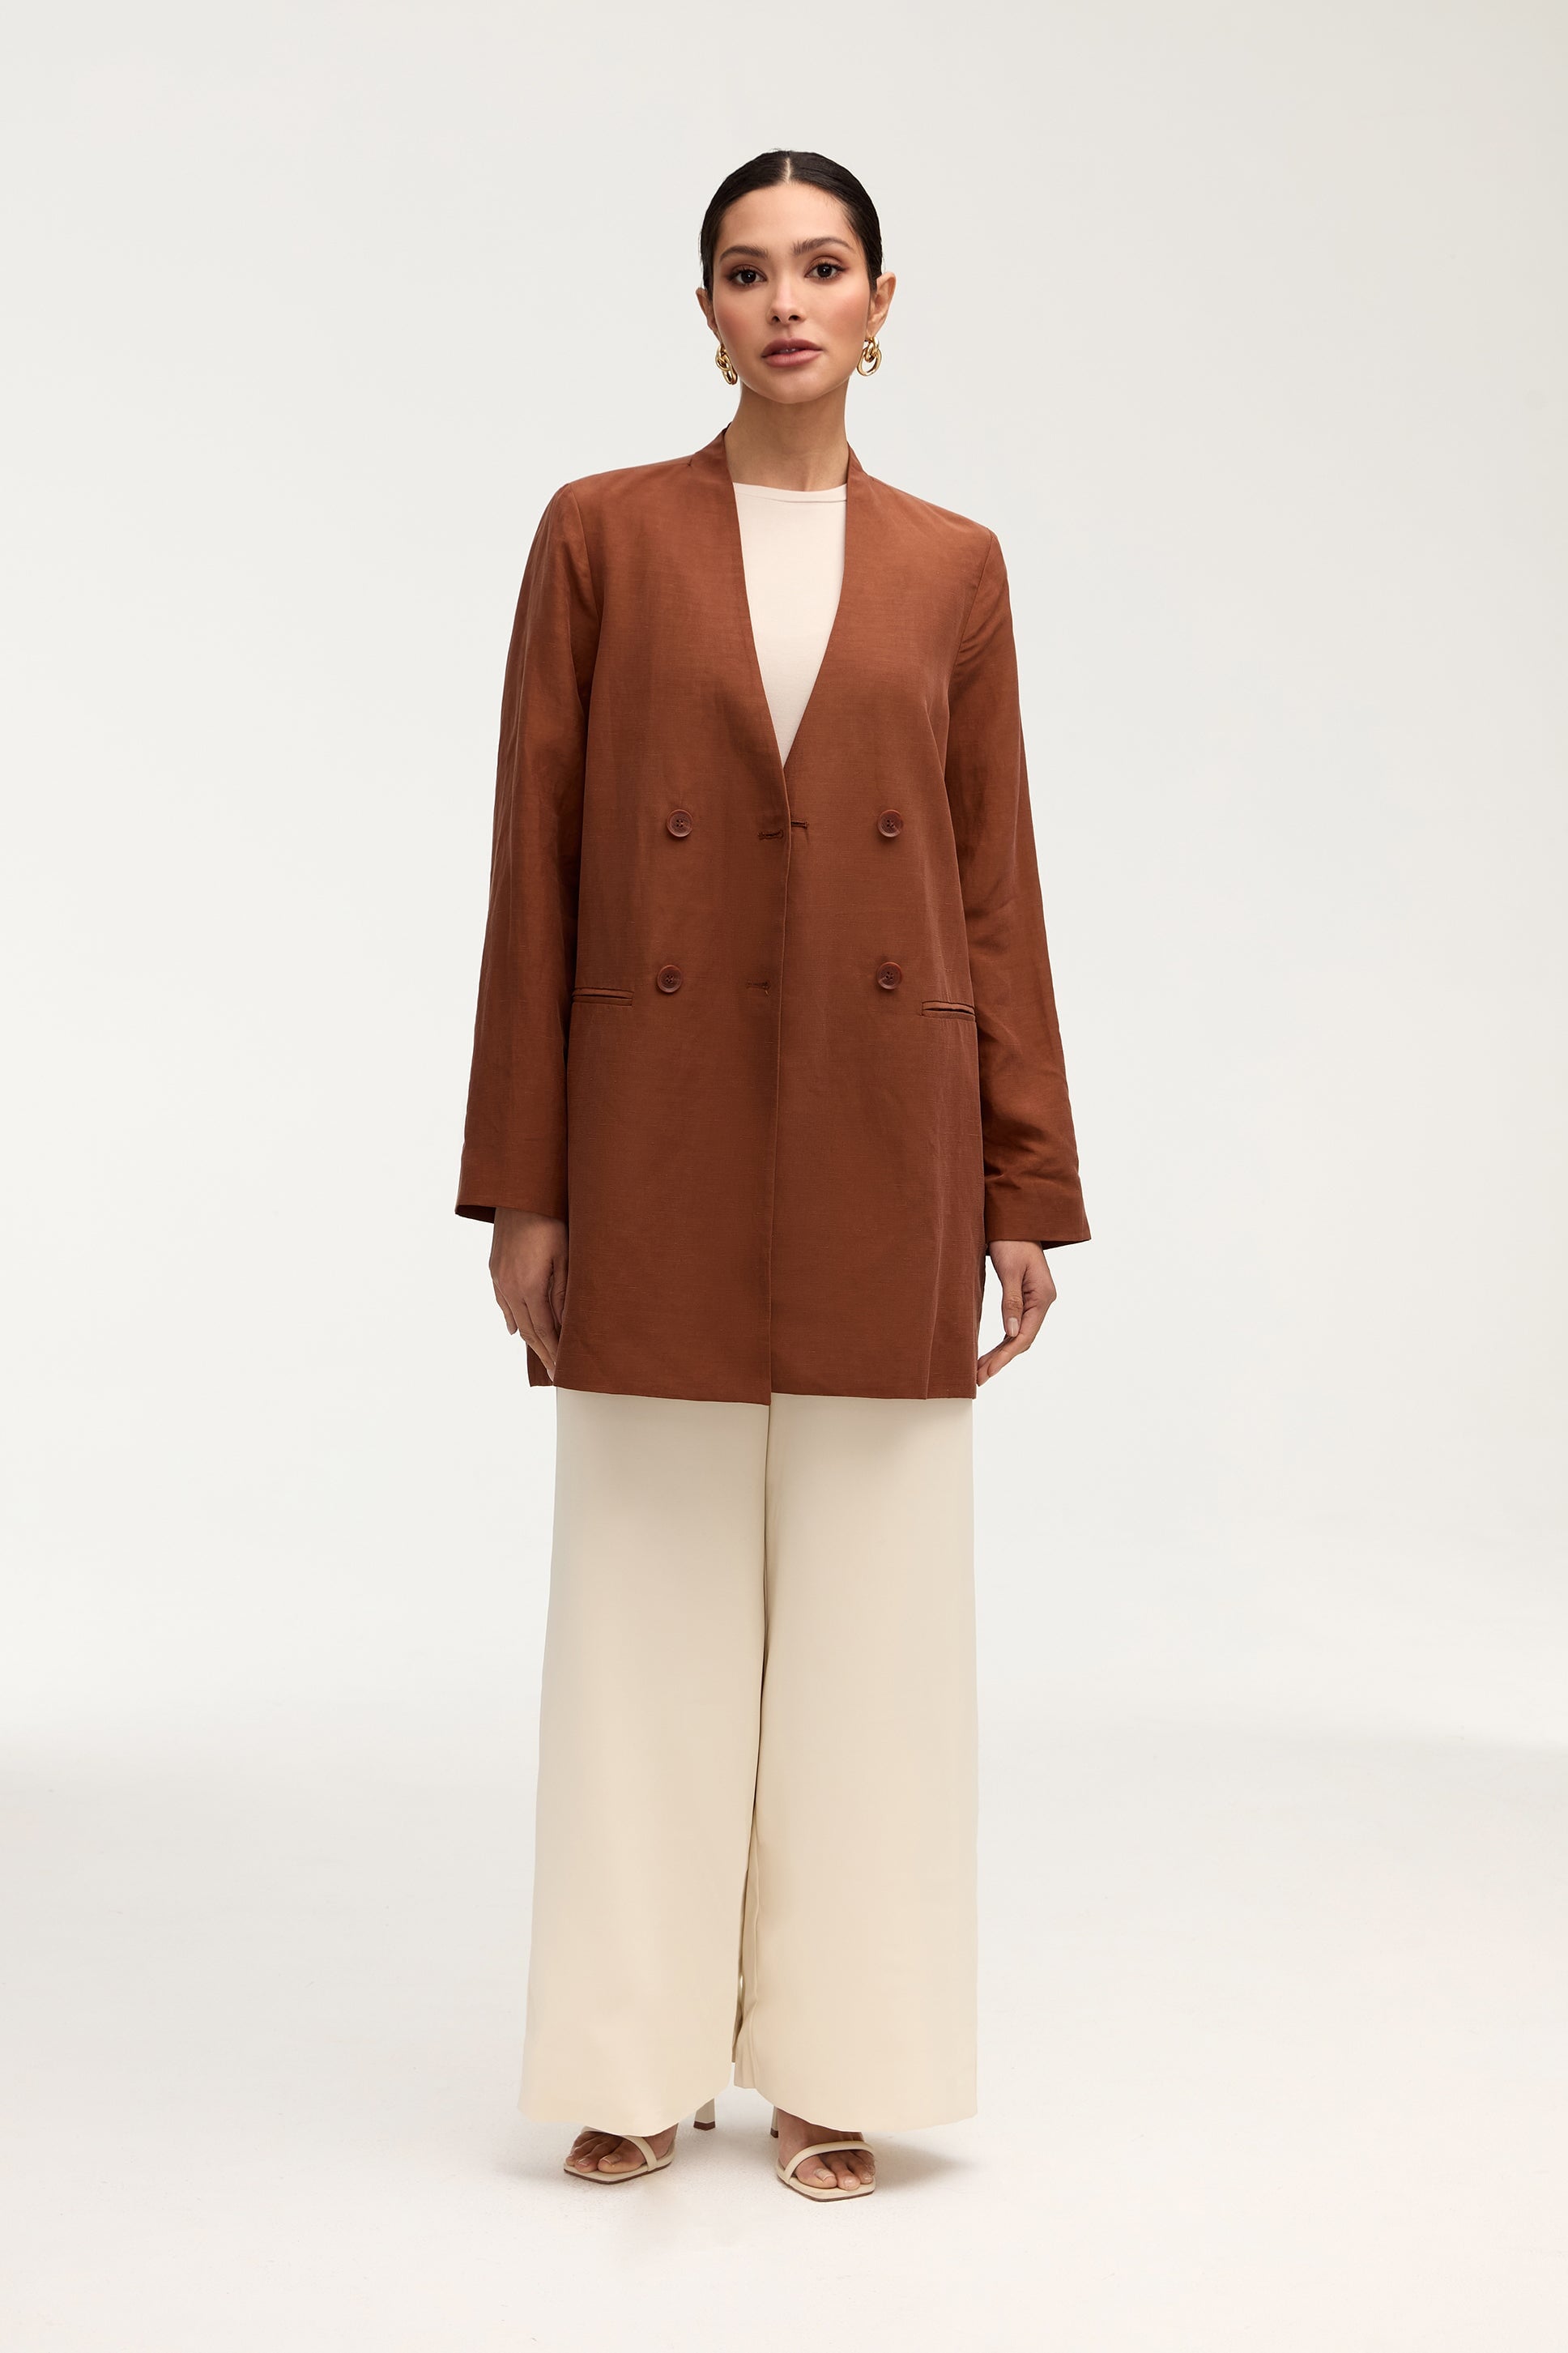 Longline Cupro Linen Oversized Blazer - Baked Clay Jackets Veiled Collection 